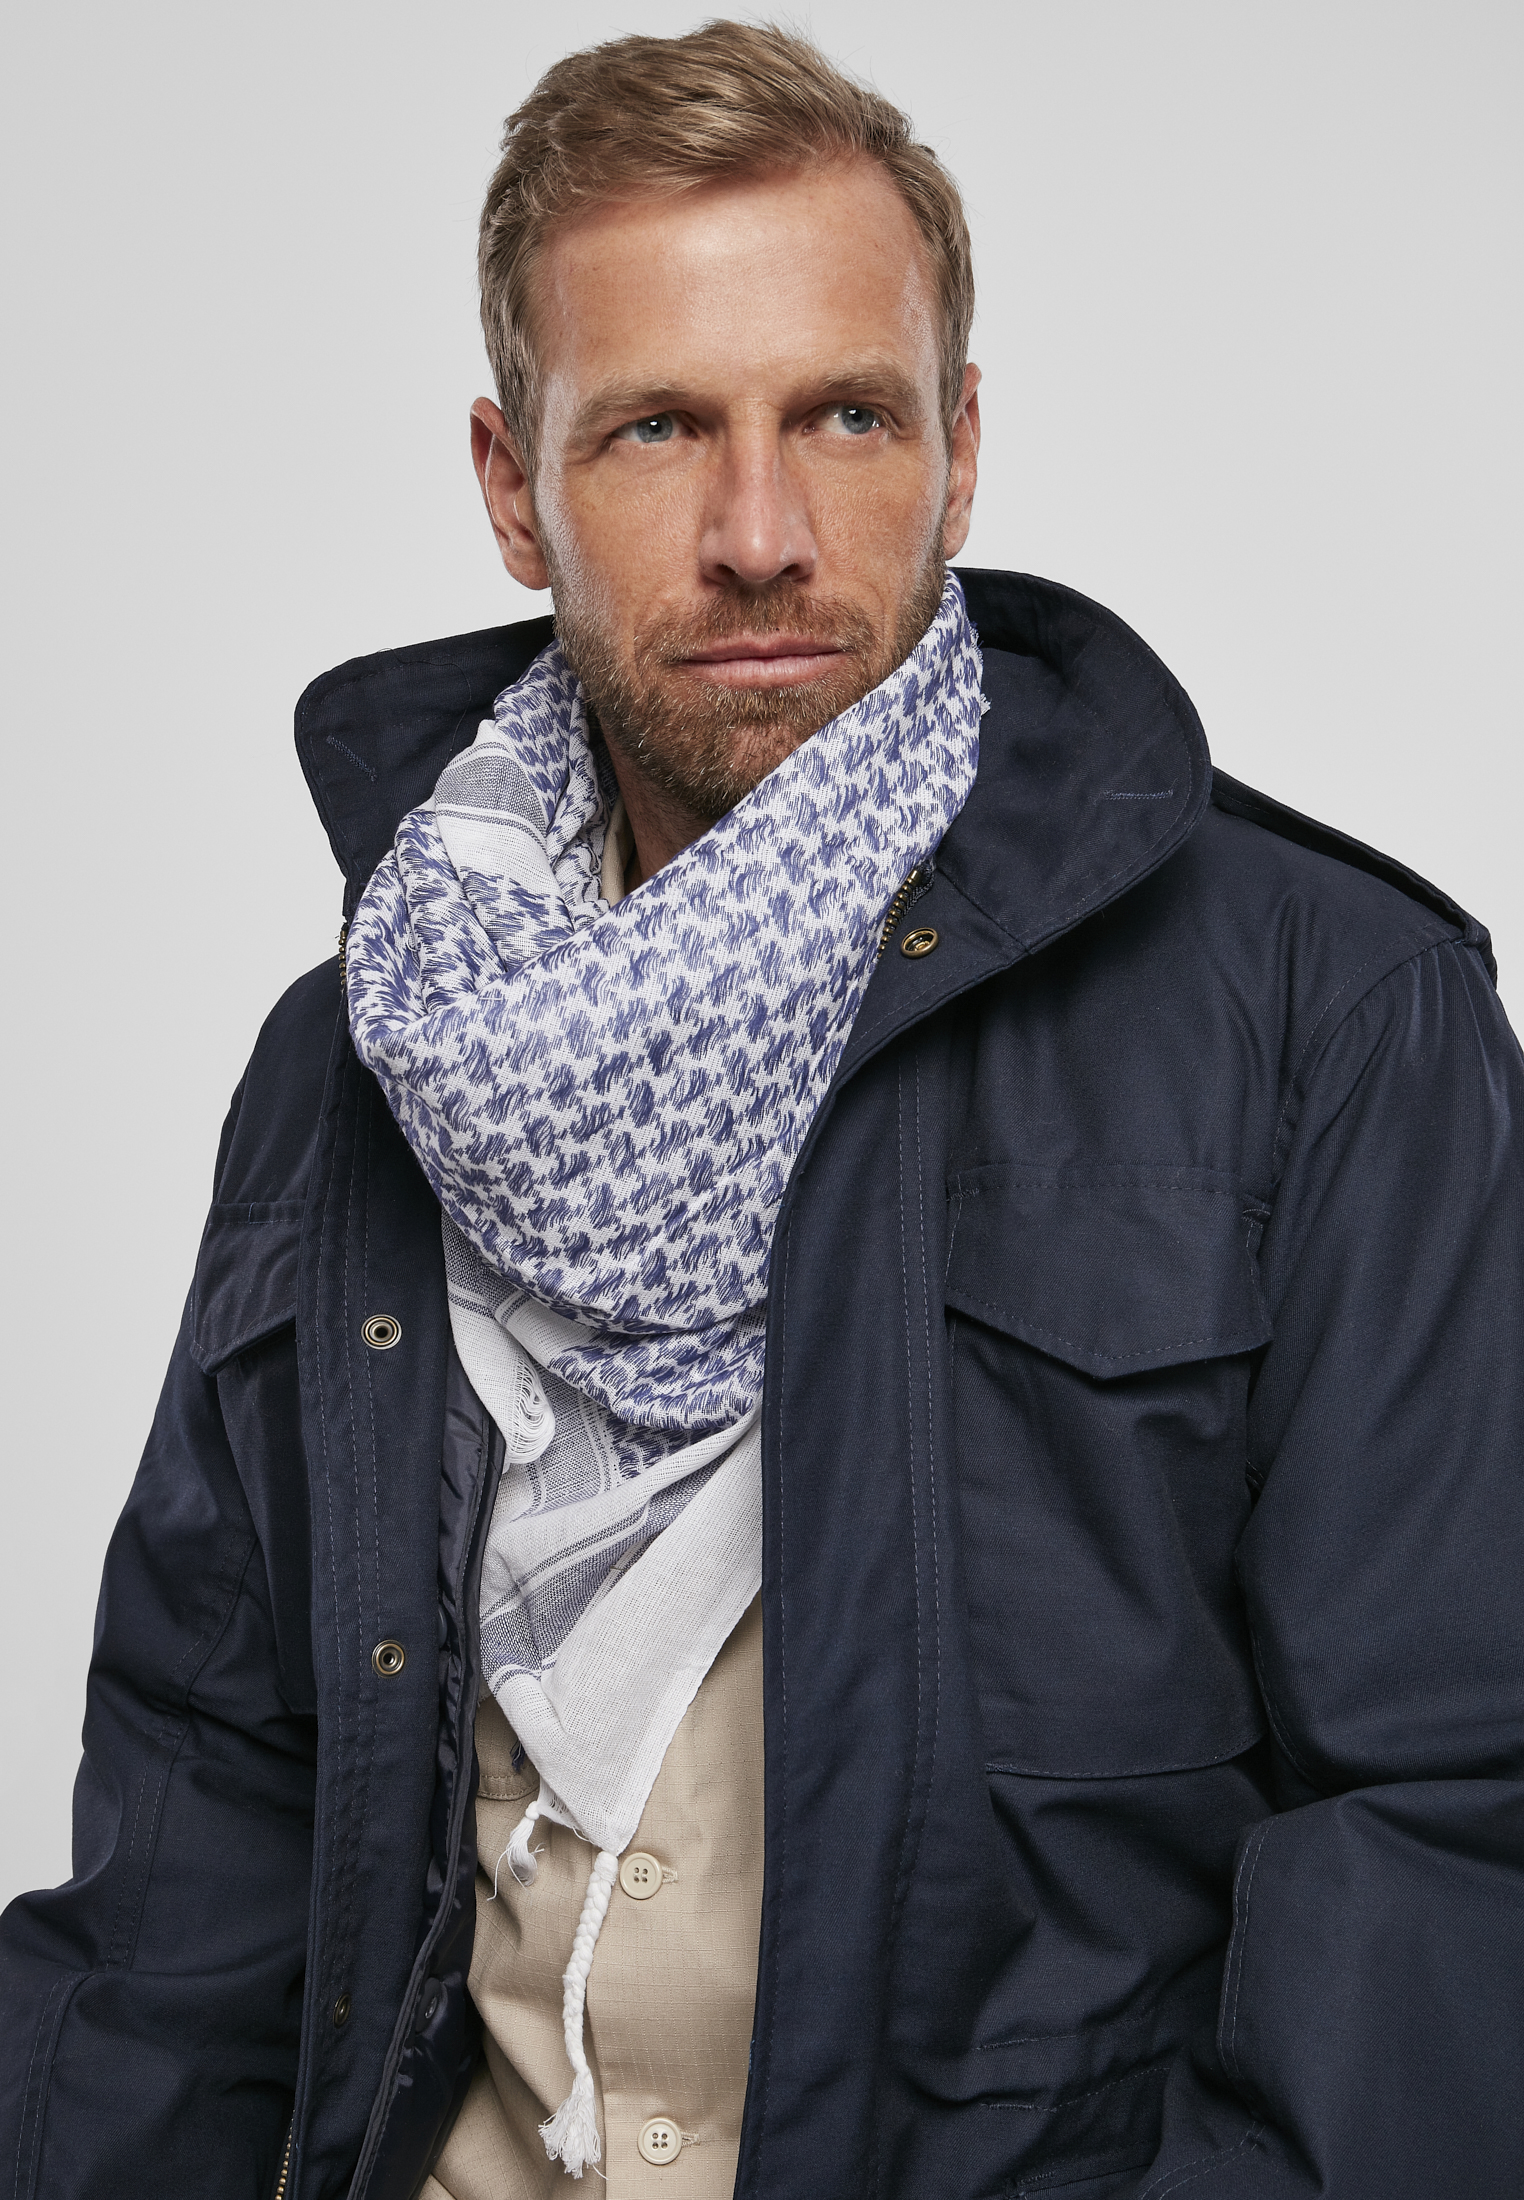 Shemag scarf blue/wht